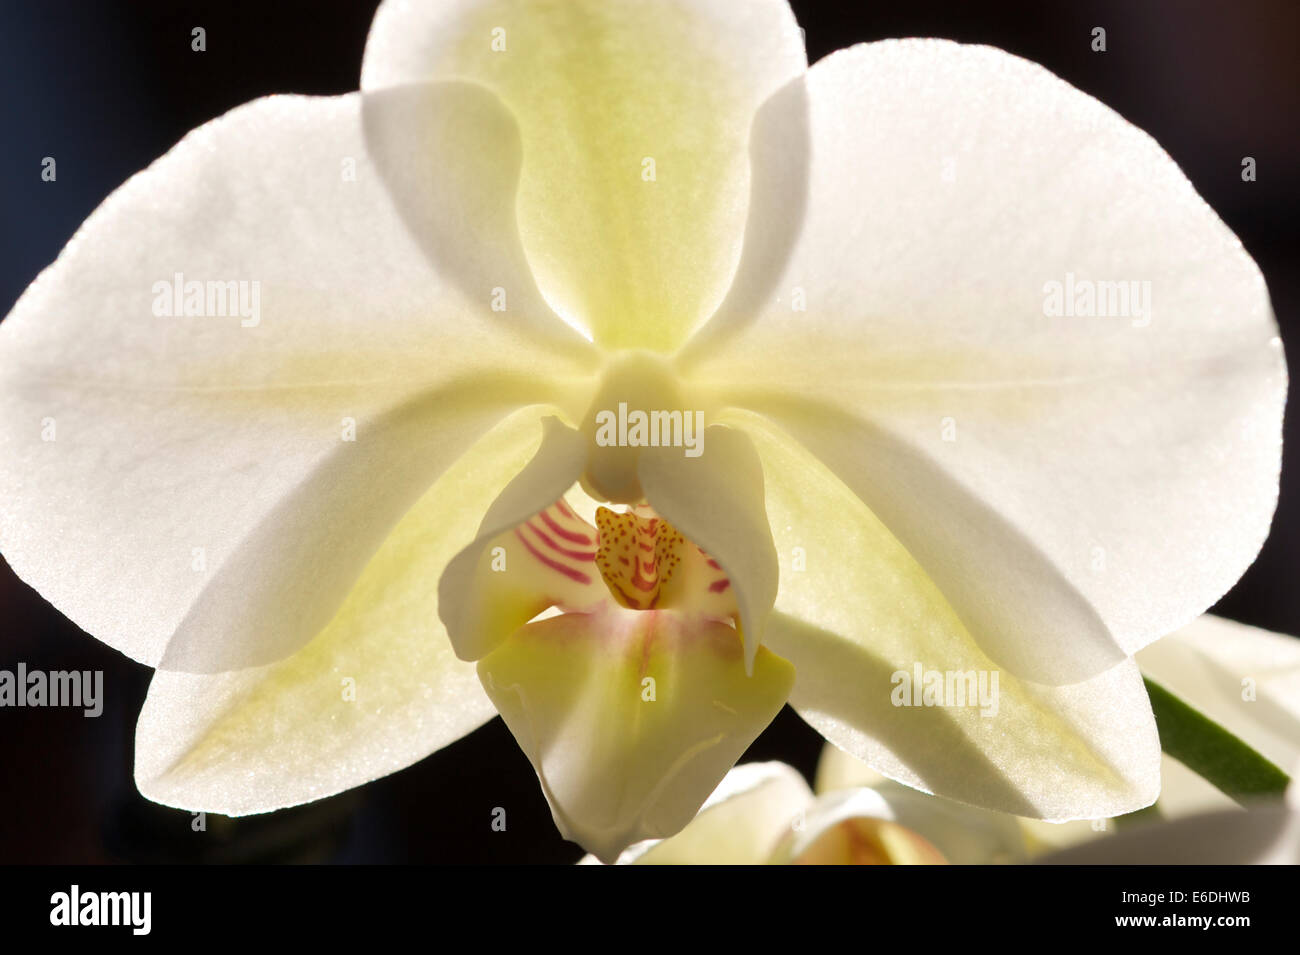 Close up image of white orchid flower showing the translucent petals.  Back lit with a dark background. Stock Photo